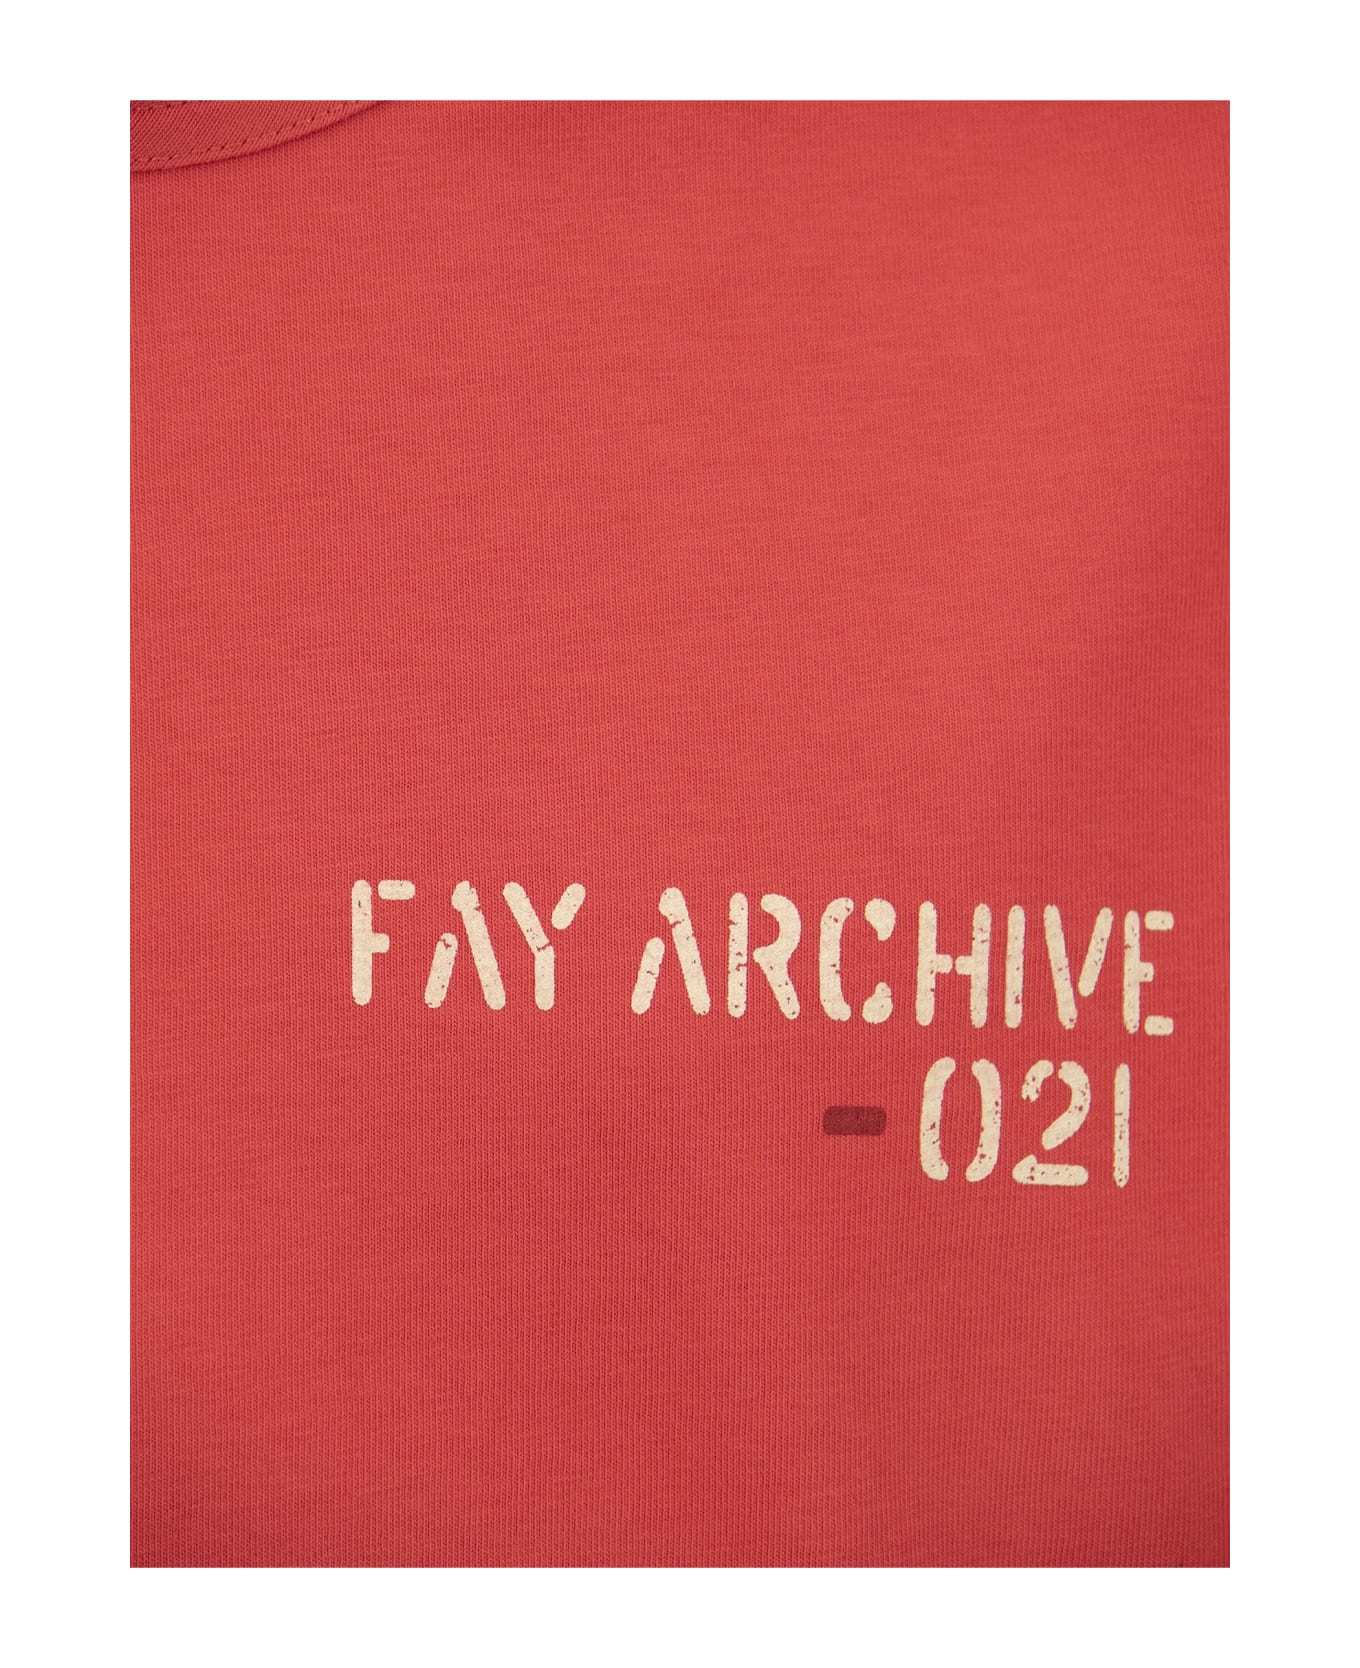 Fay Archive T-shirt - Lobster